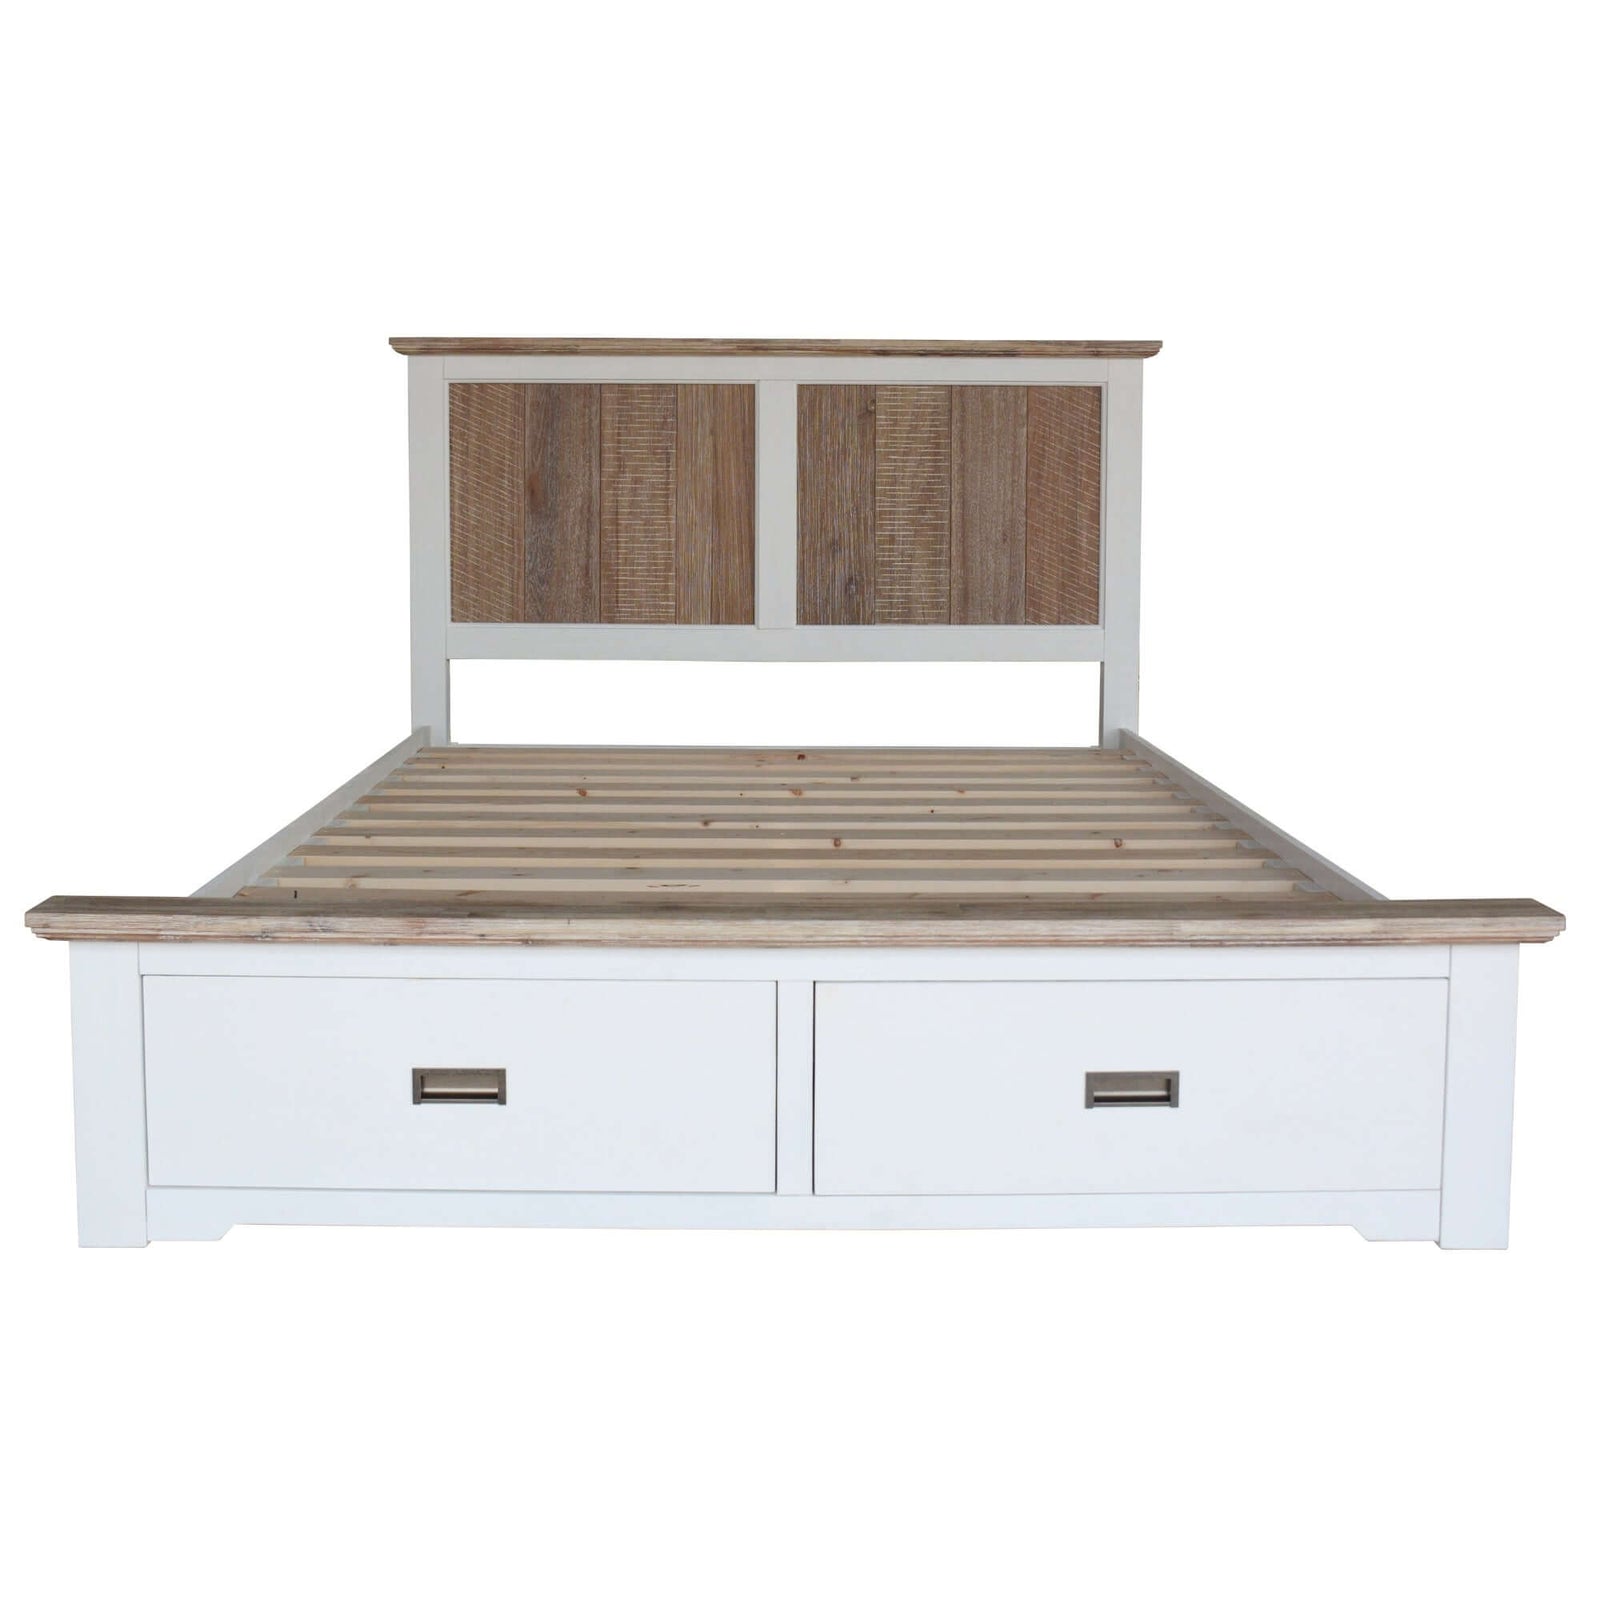 Fiona Bed Frame Queen Size Timber Mattress Base With Storage Drawers White Grey-Upinteriors